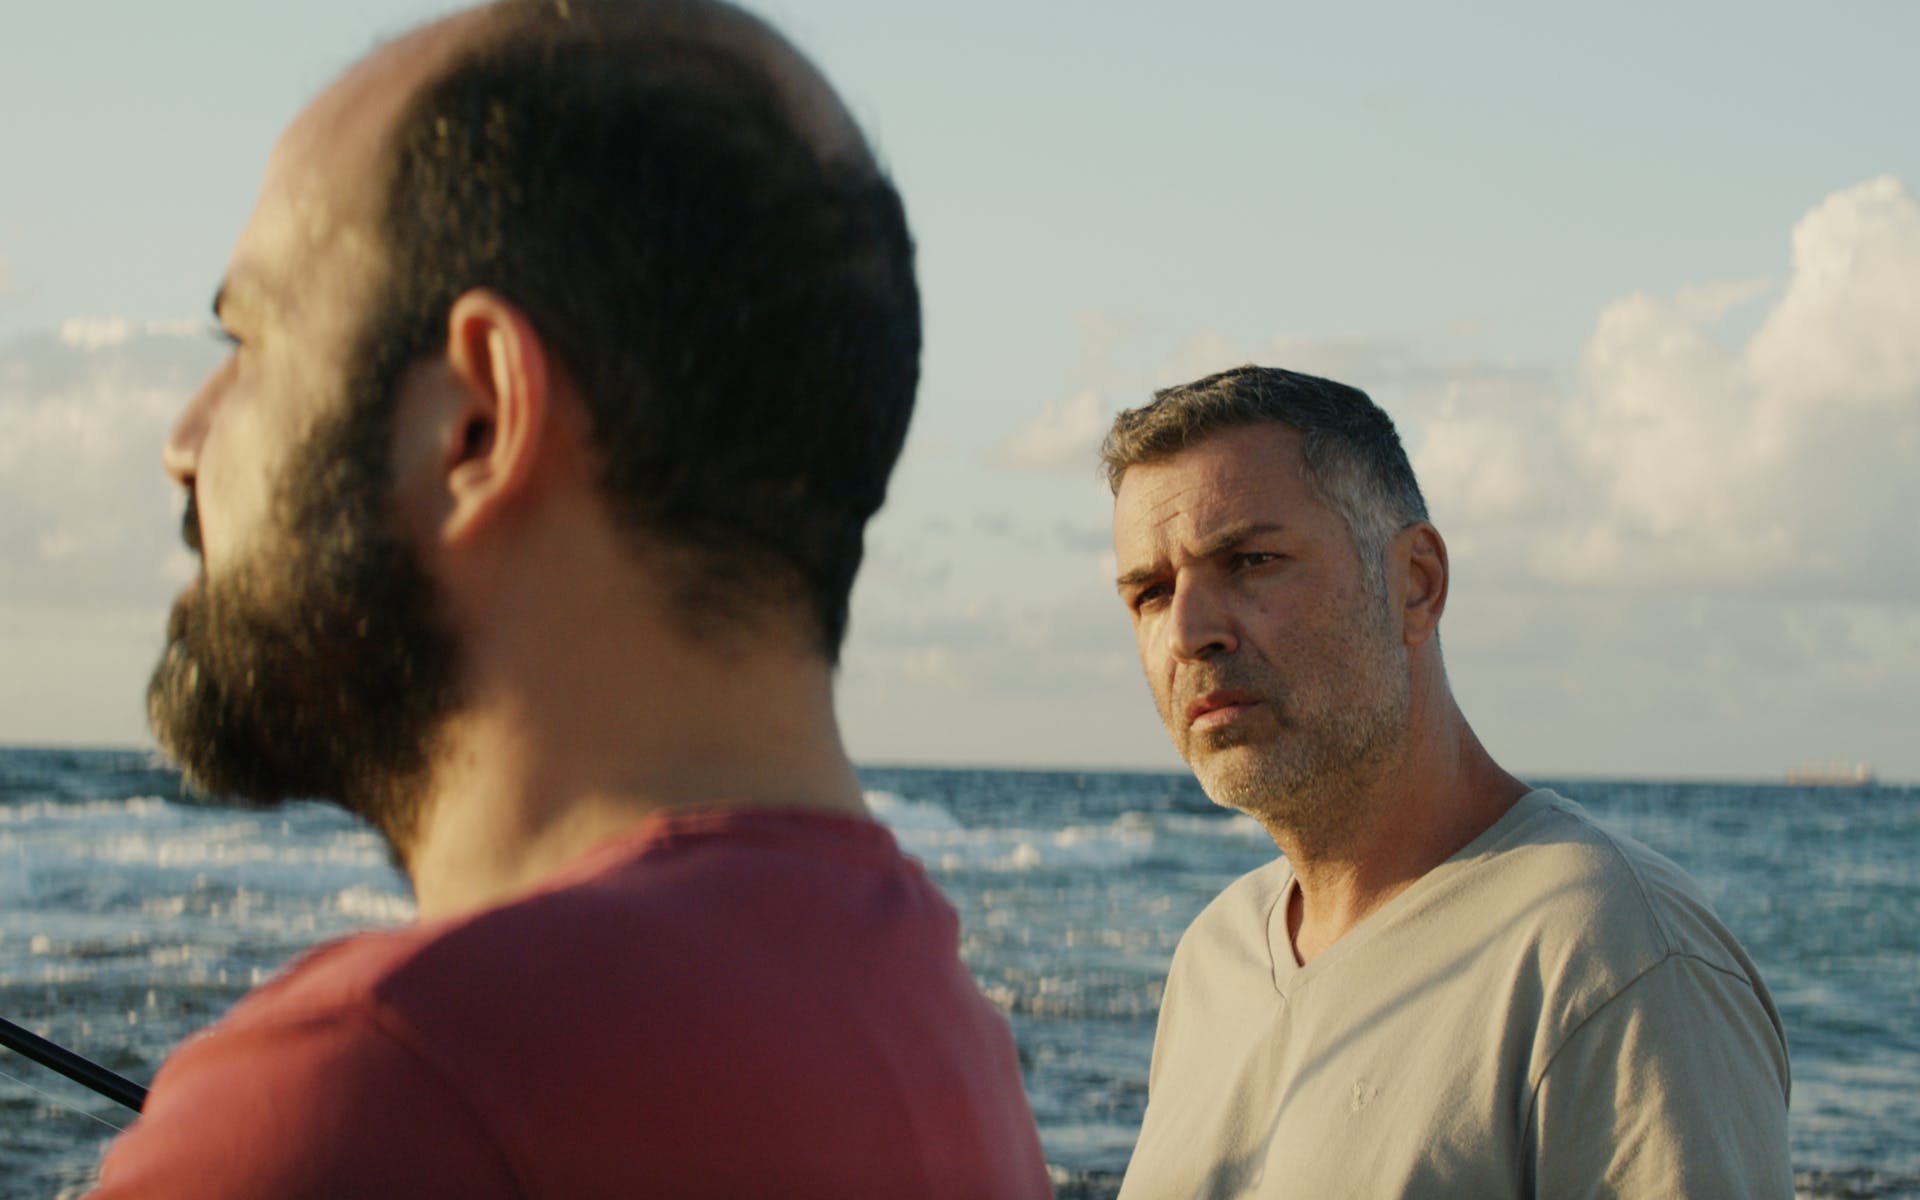 A man in a gray shirt looks at another slightly blurred man in the foreground who looks out at the sea and clouds beyond them.